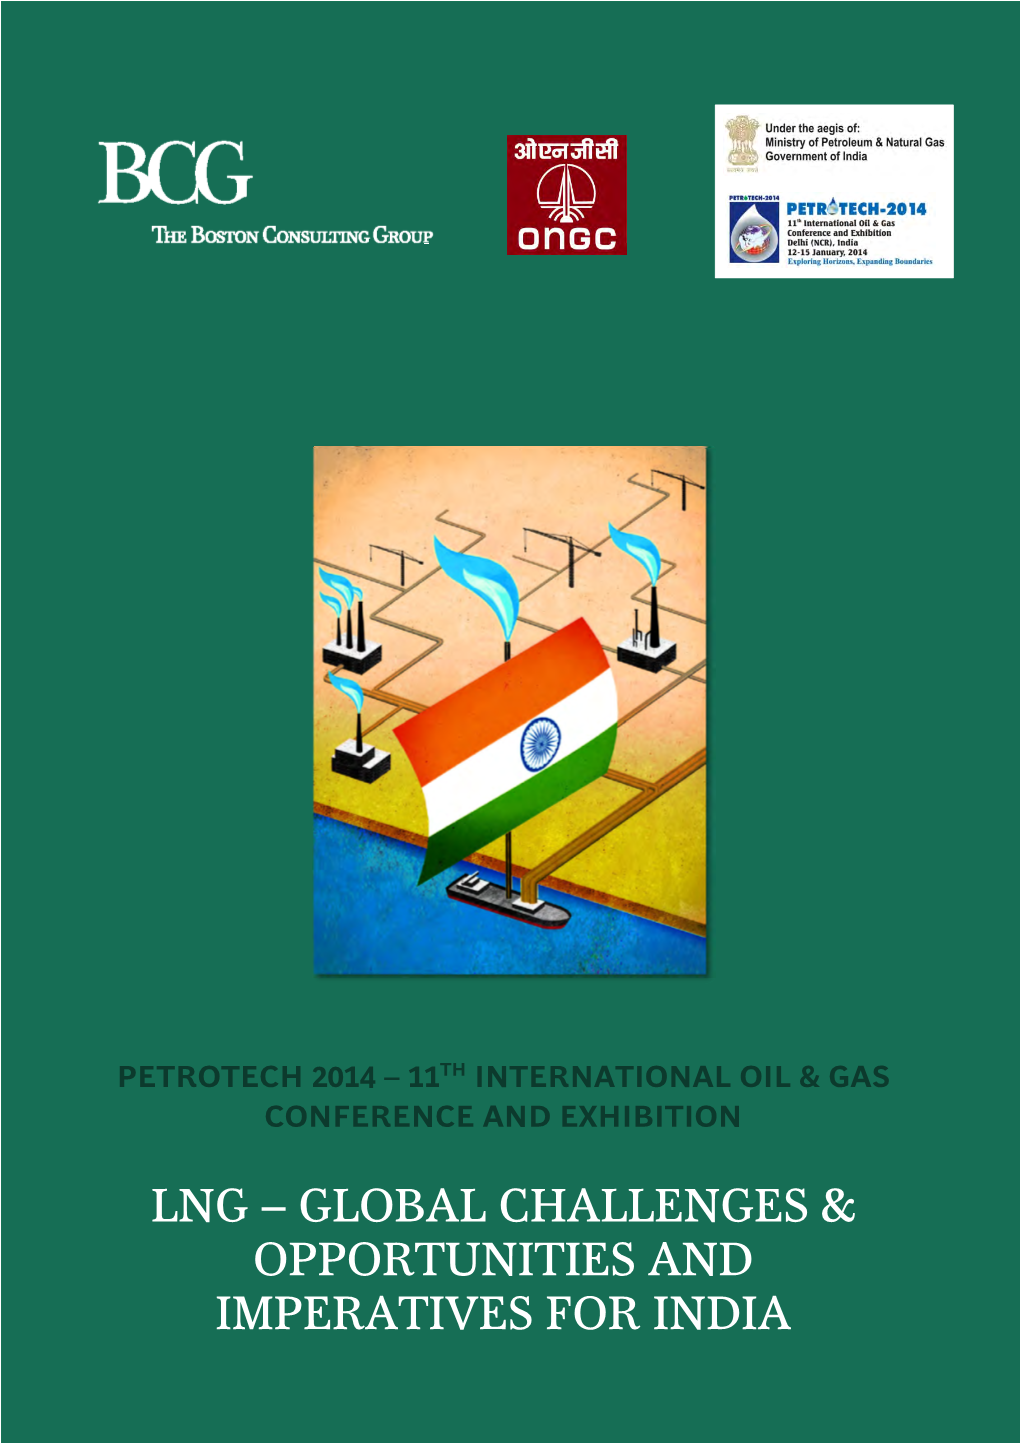 Global Challenges & Opportunities and Imperatives for India